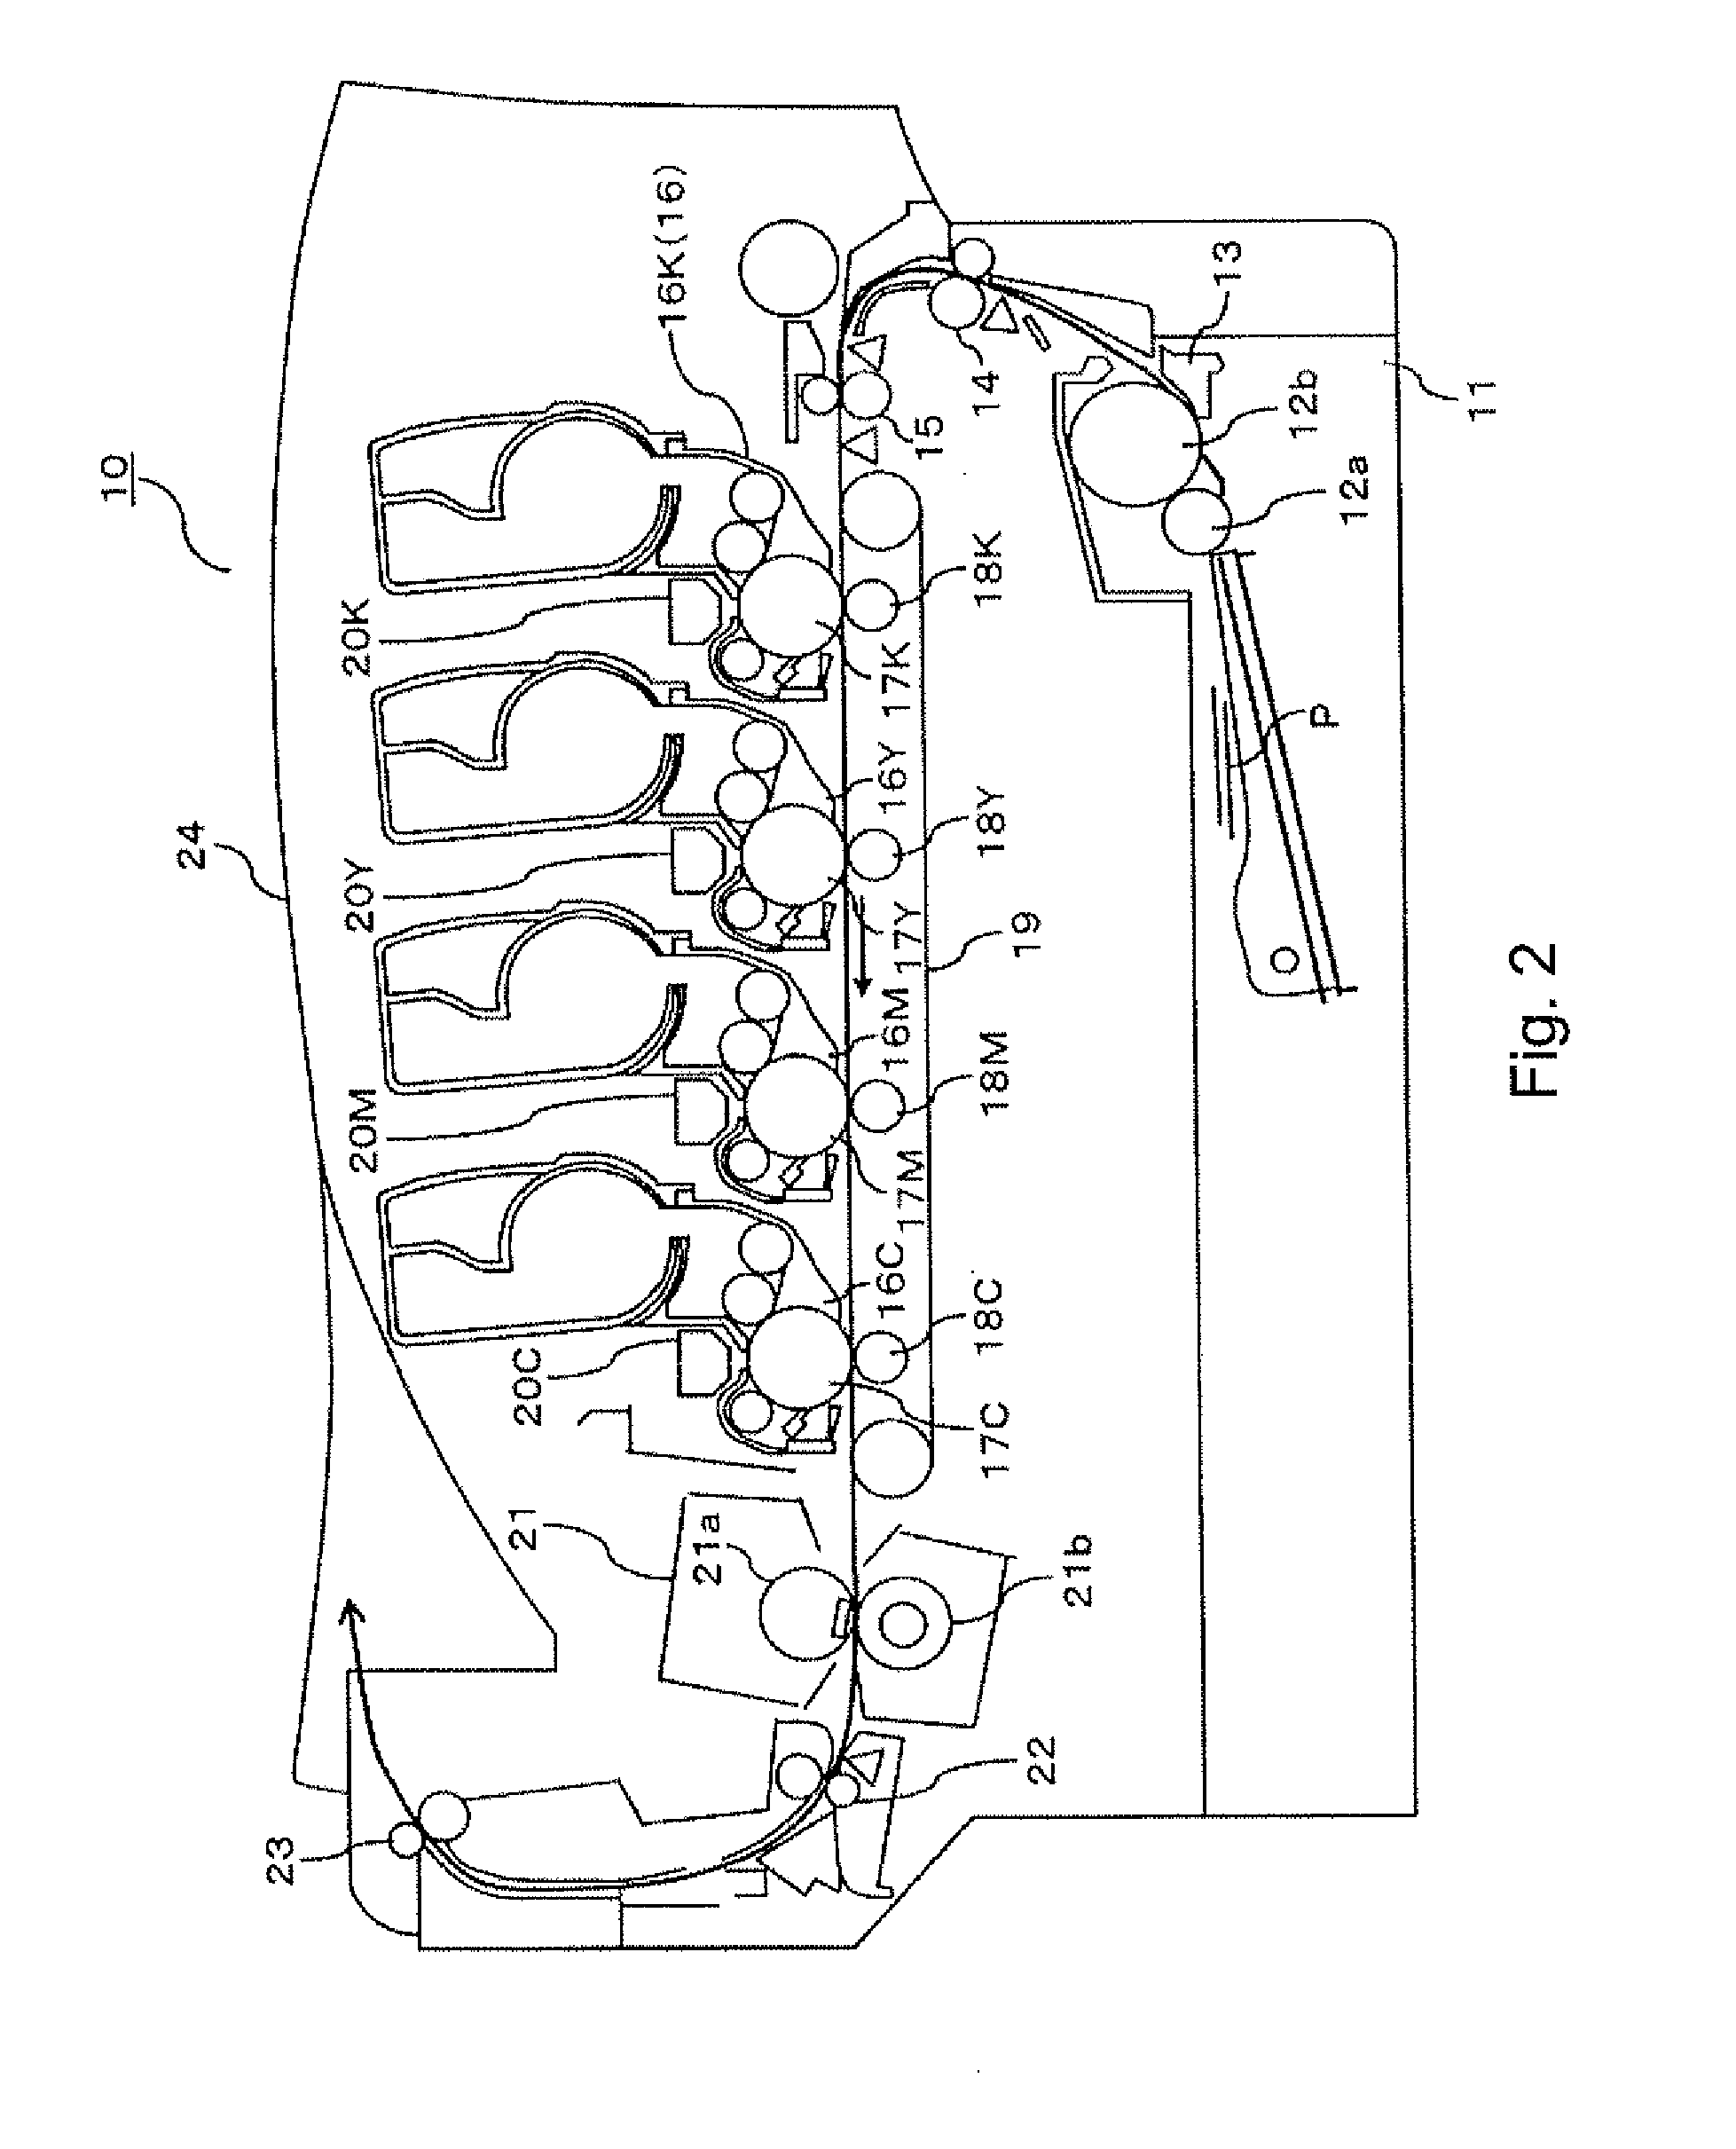 Image forming device and method therefor